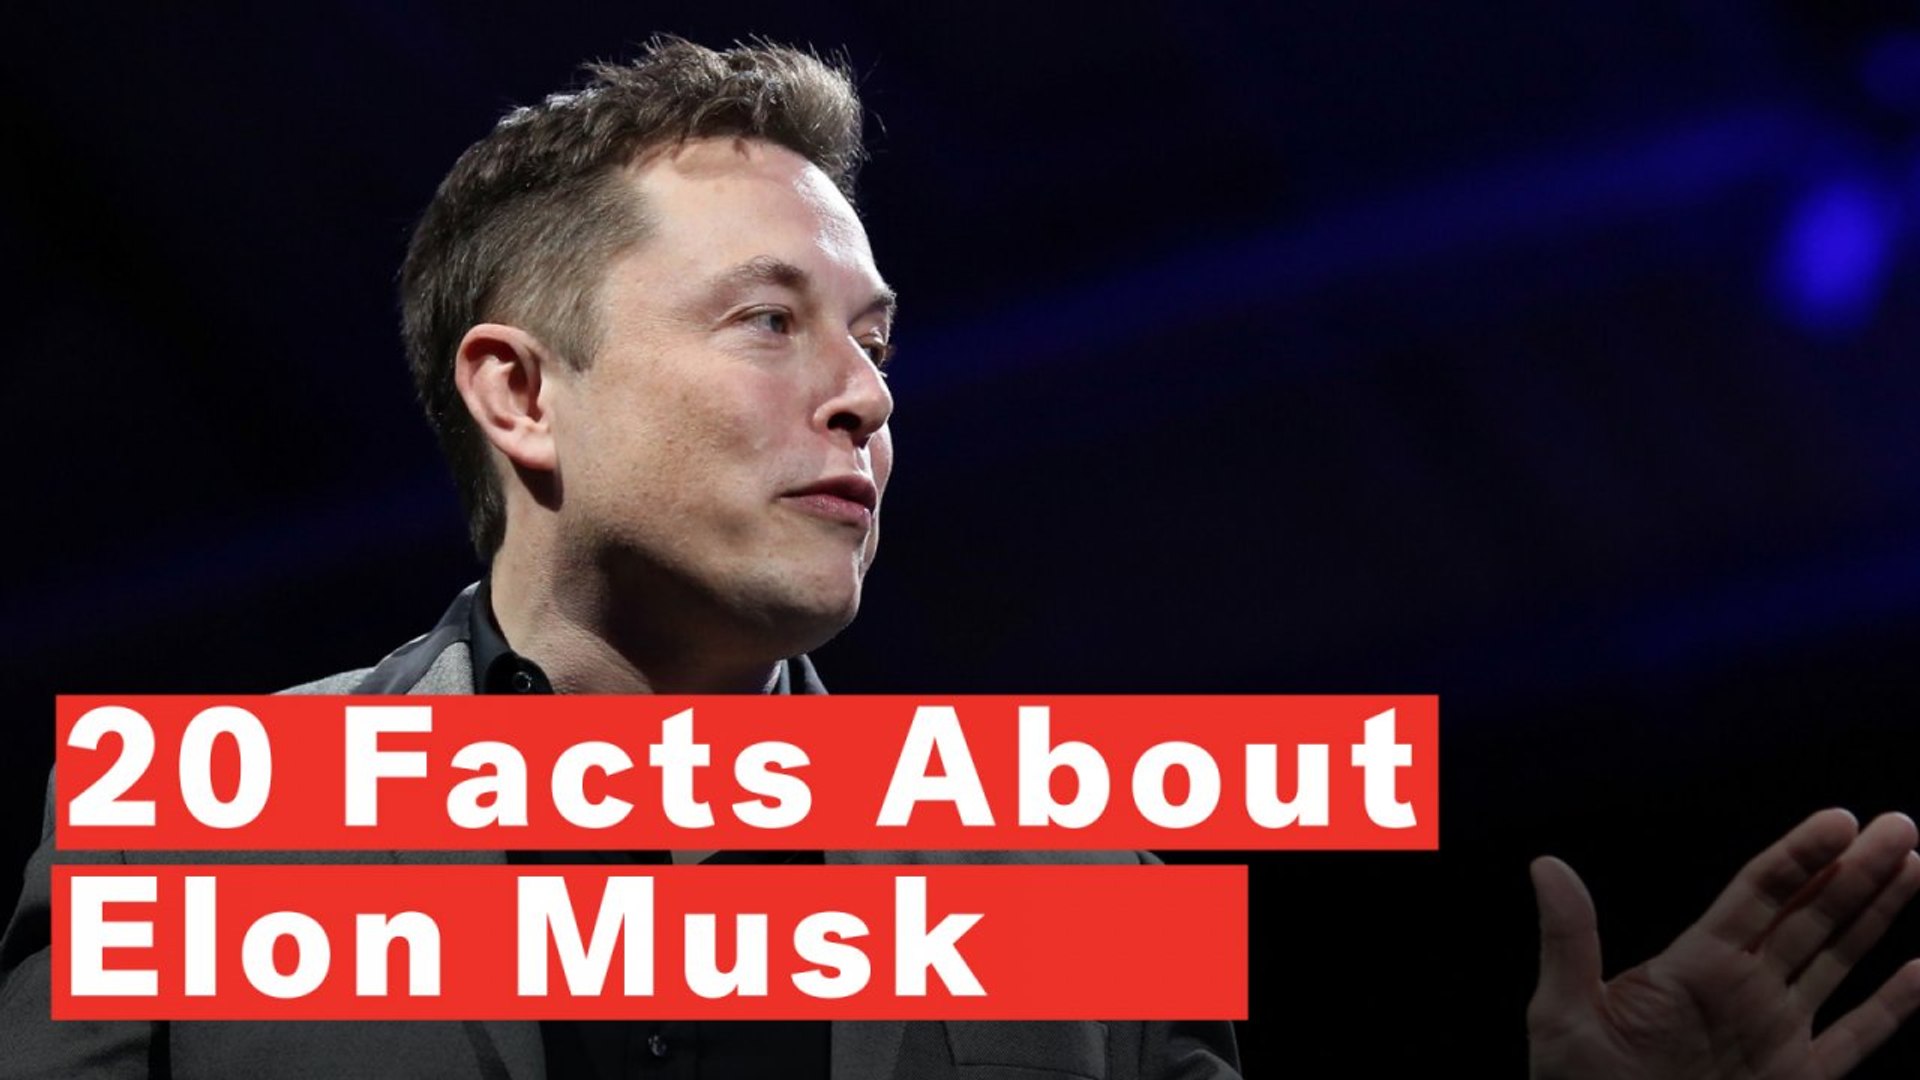 20 Facts About Elon Musk